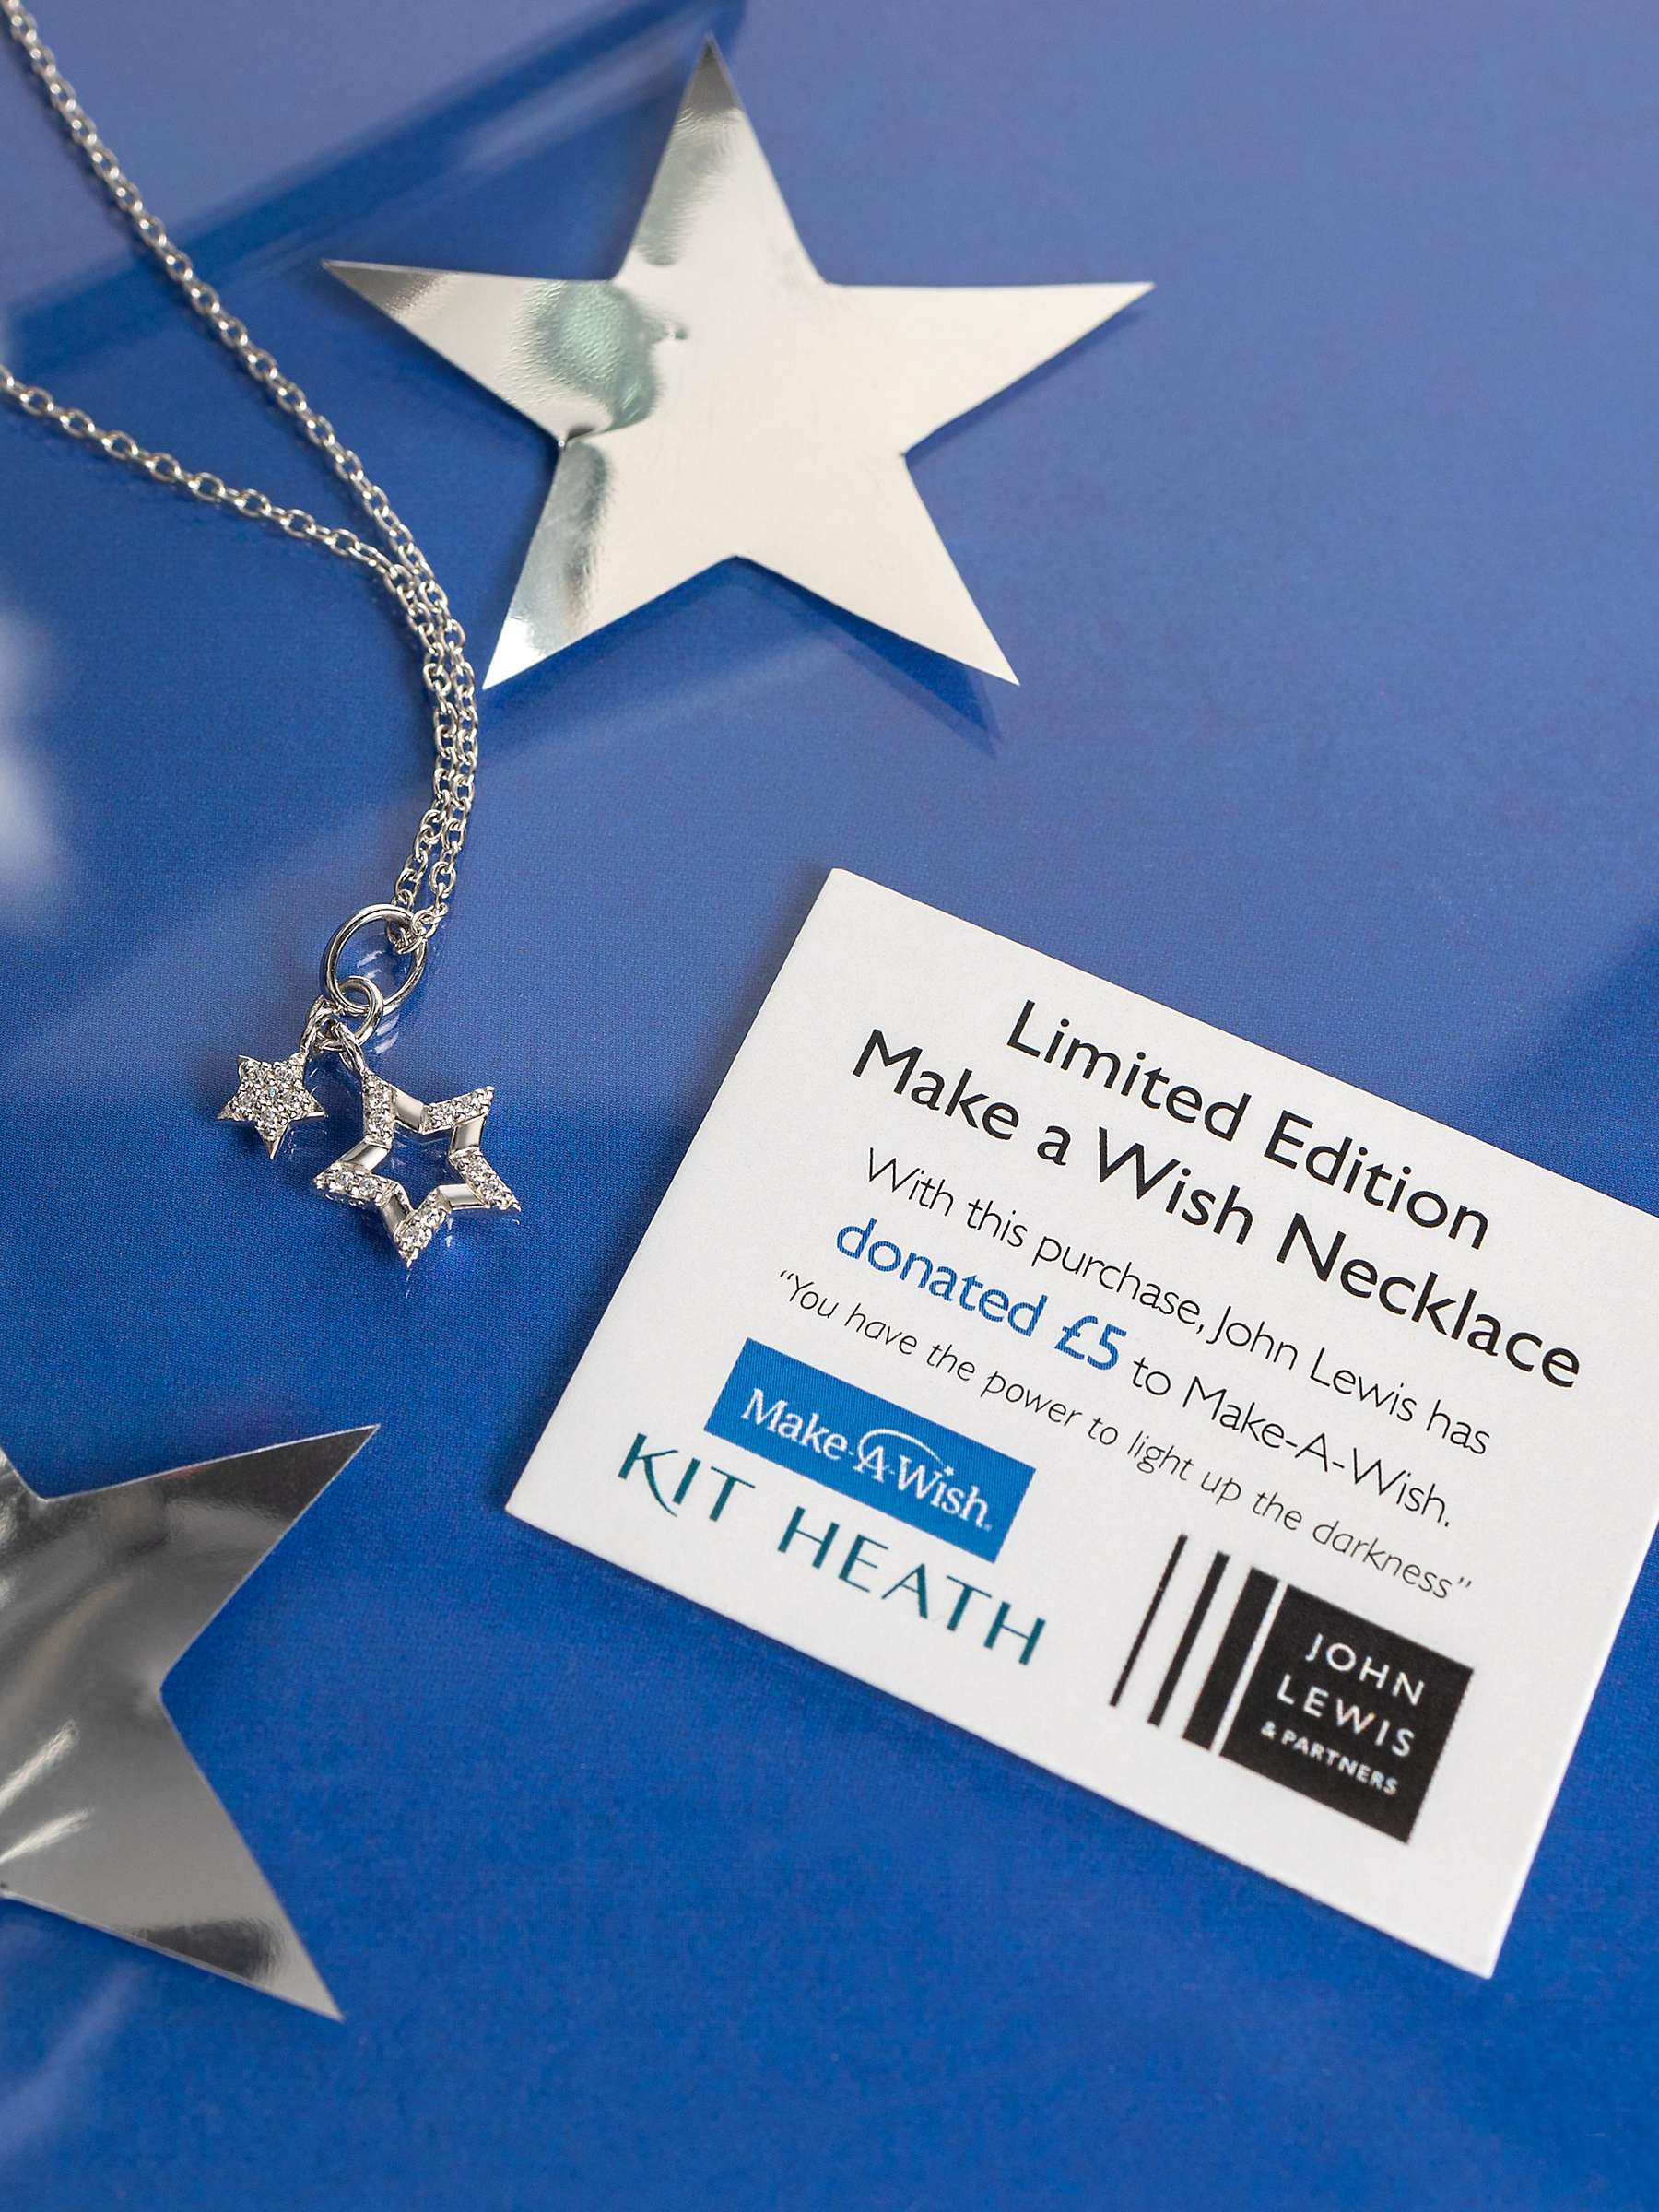 Buy Kit Heath Make a Wish Upon a Star Pendant Necklace, Silver Online at johnlewis.com